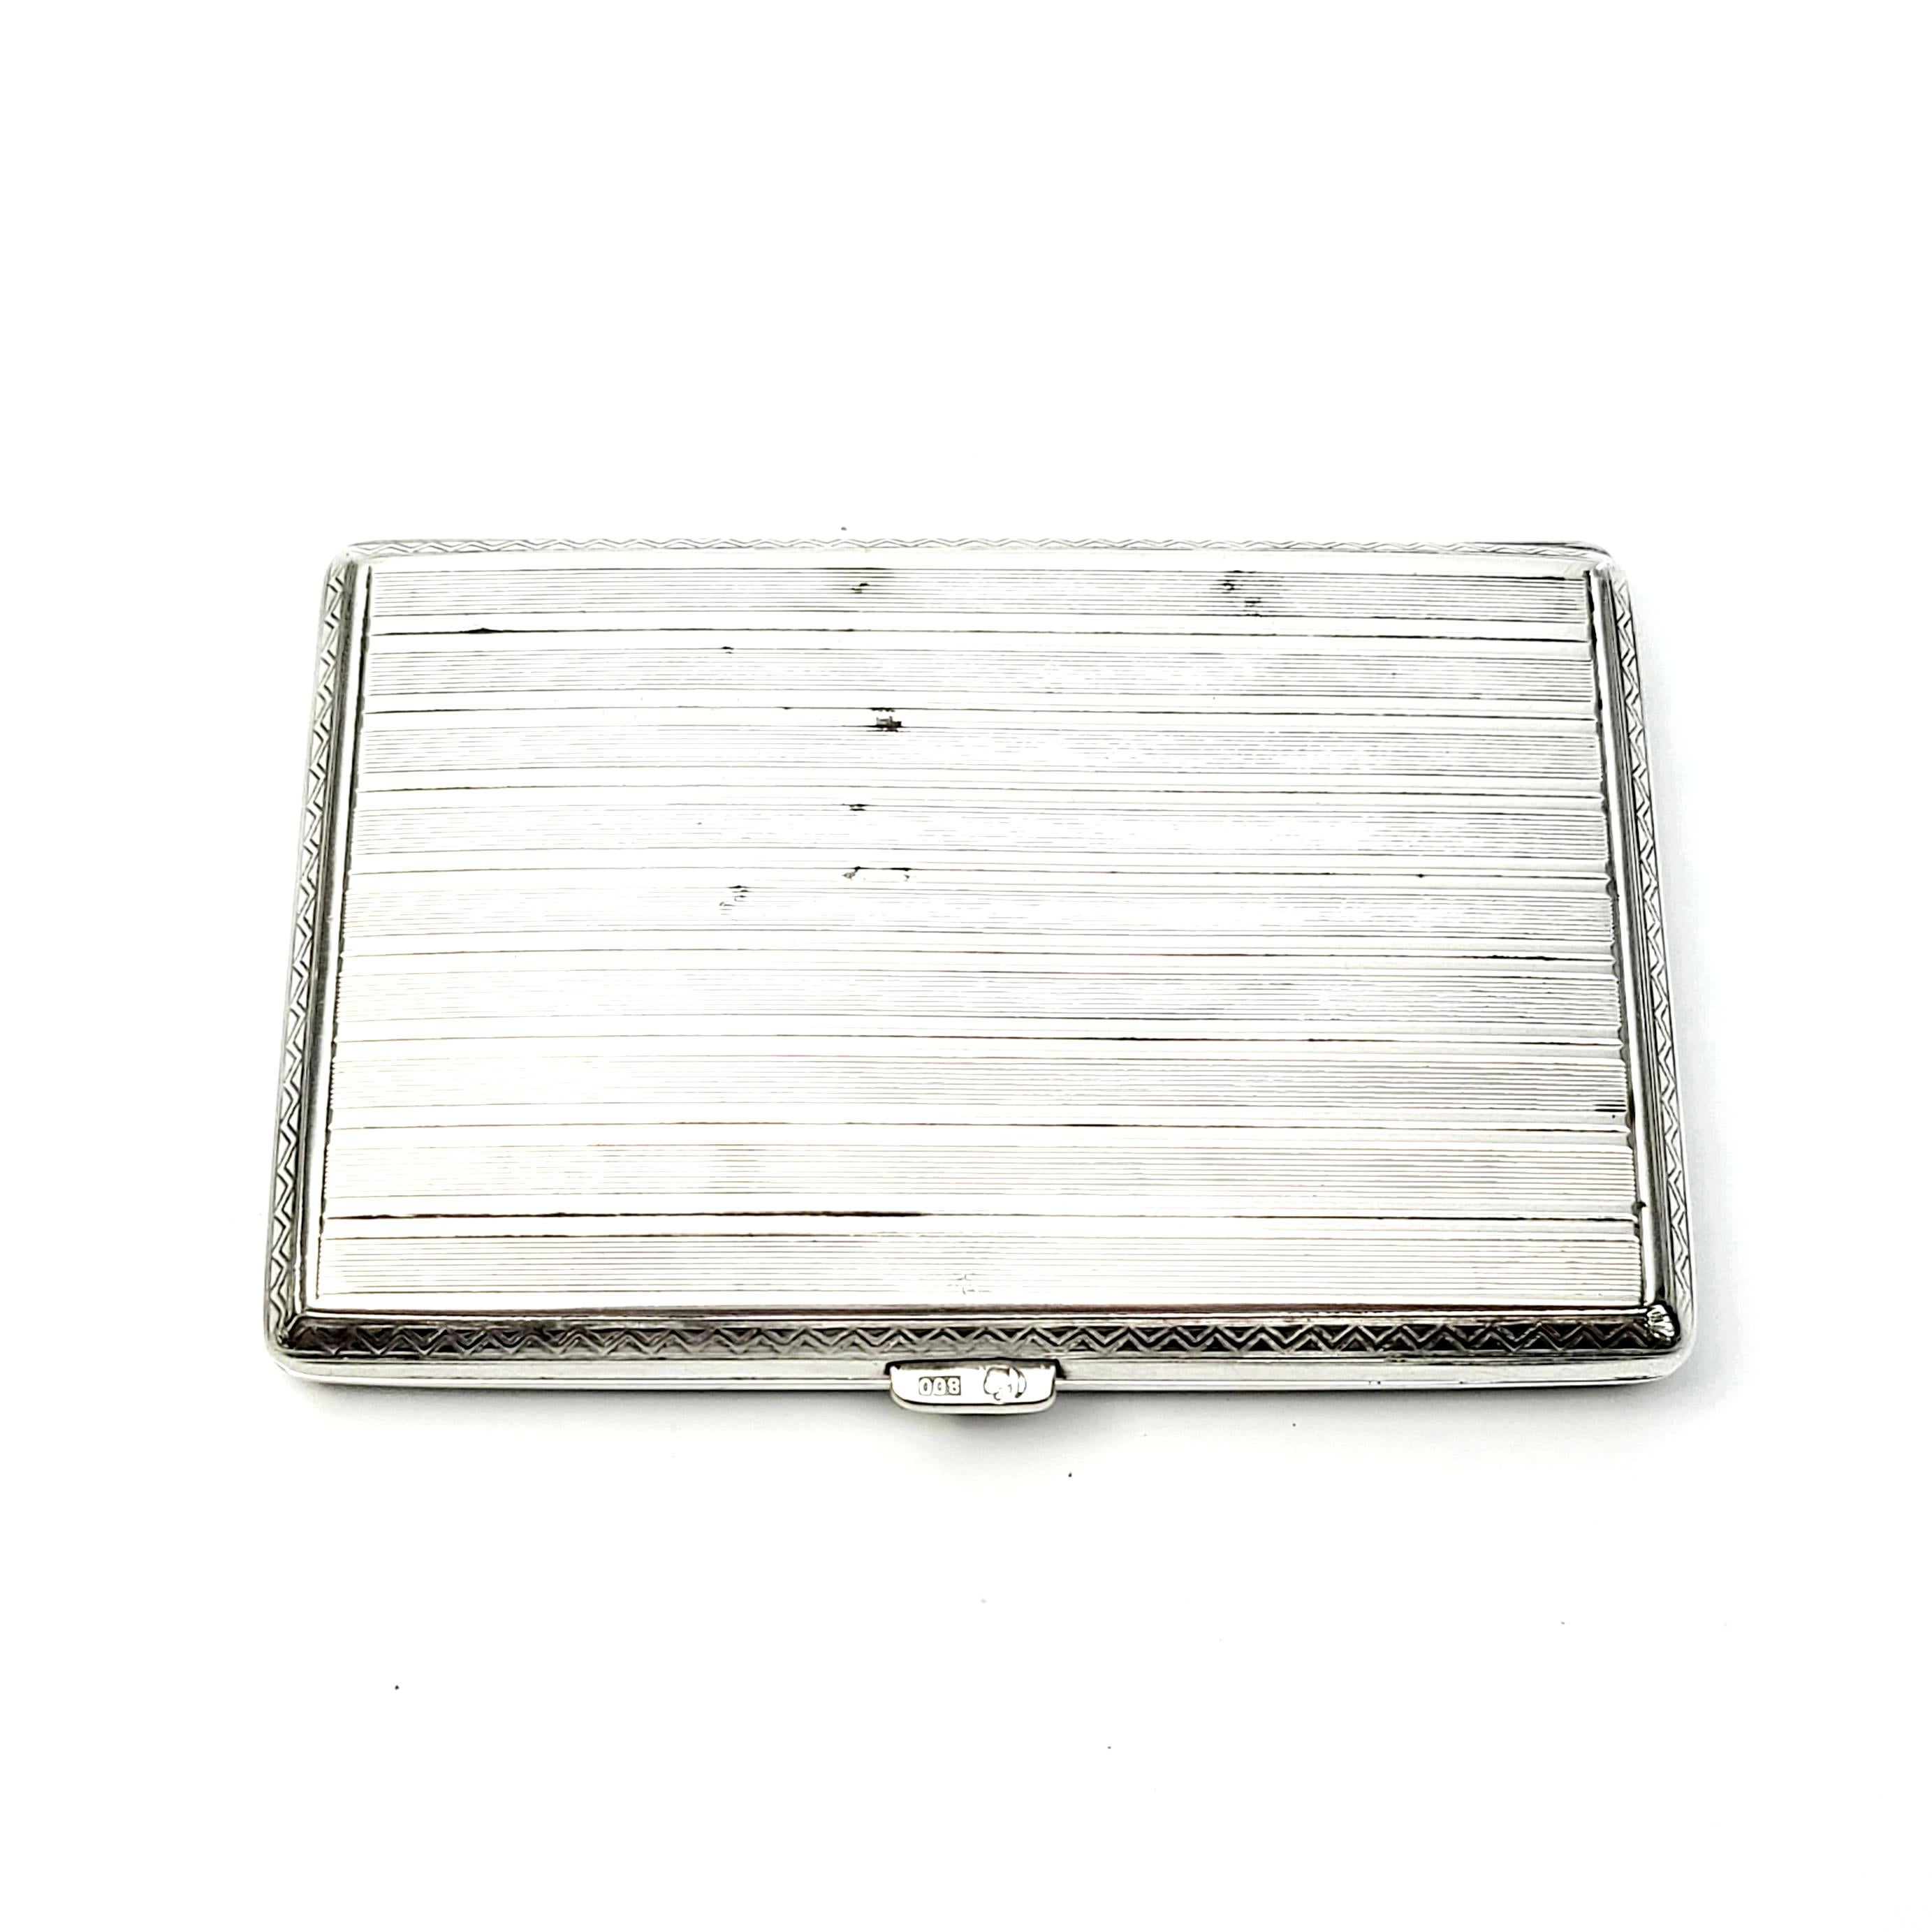 Vintage German 800 silver cigarette case.

This piece features a banded etched striped design on both sides with a triangular design border. Push button mechanism to open. Elastic bands on interior.

Measures approximate 3 3/8